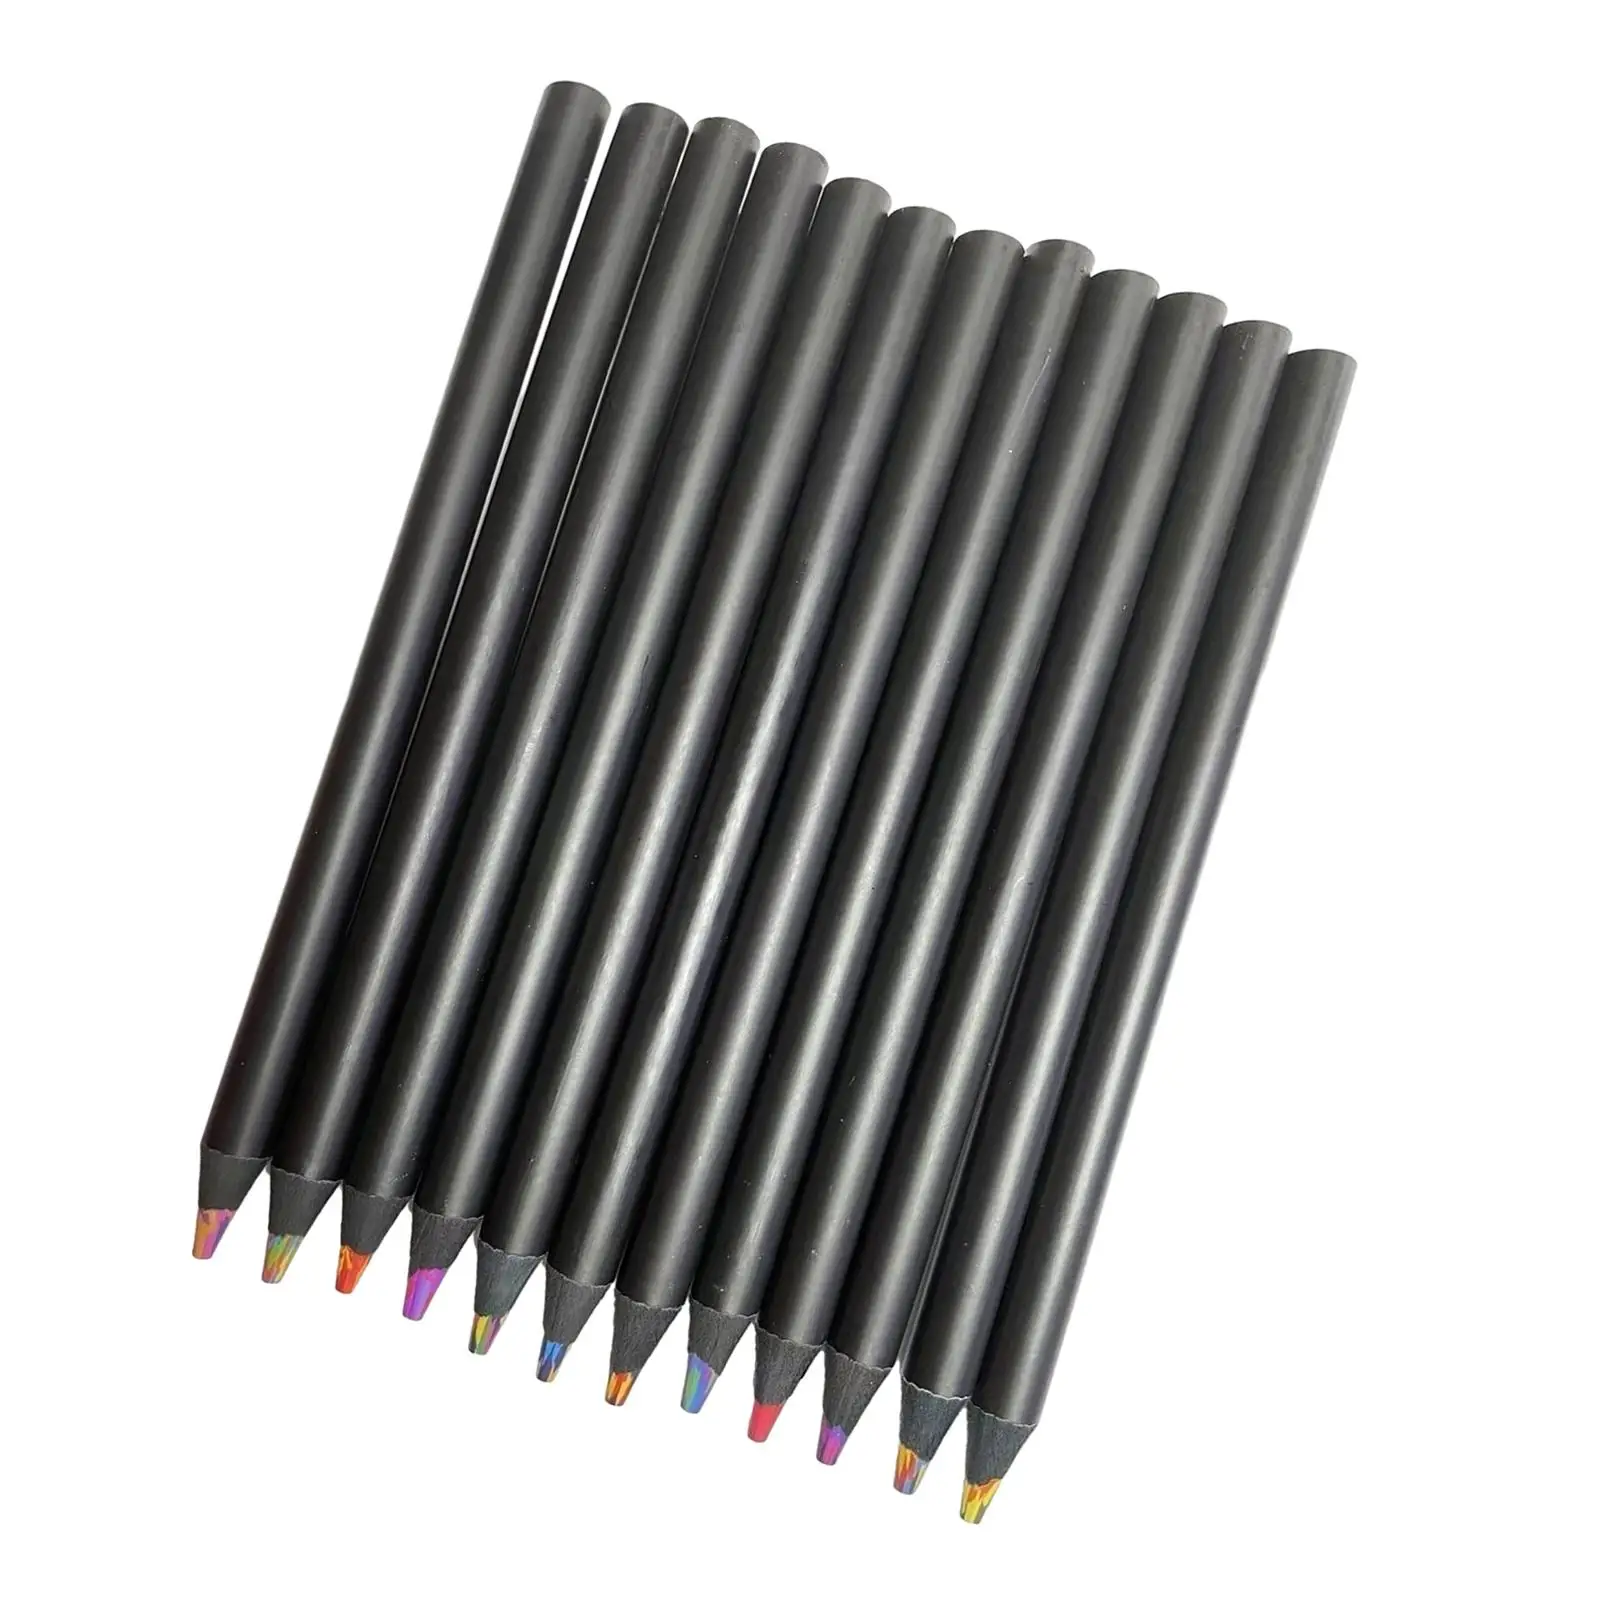 Rainbow Colored Pencils Sketching for Party Bag Wooden Jumbo Coloring Pencil